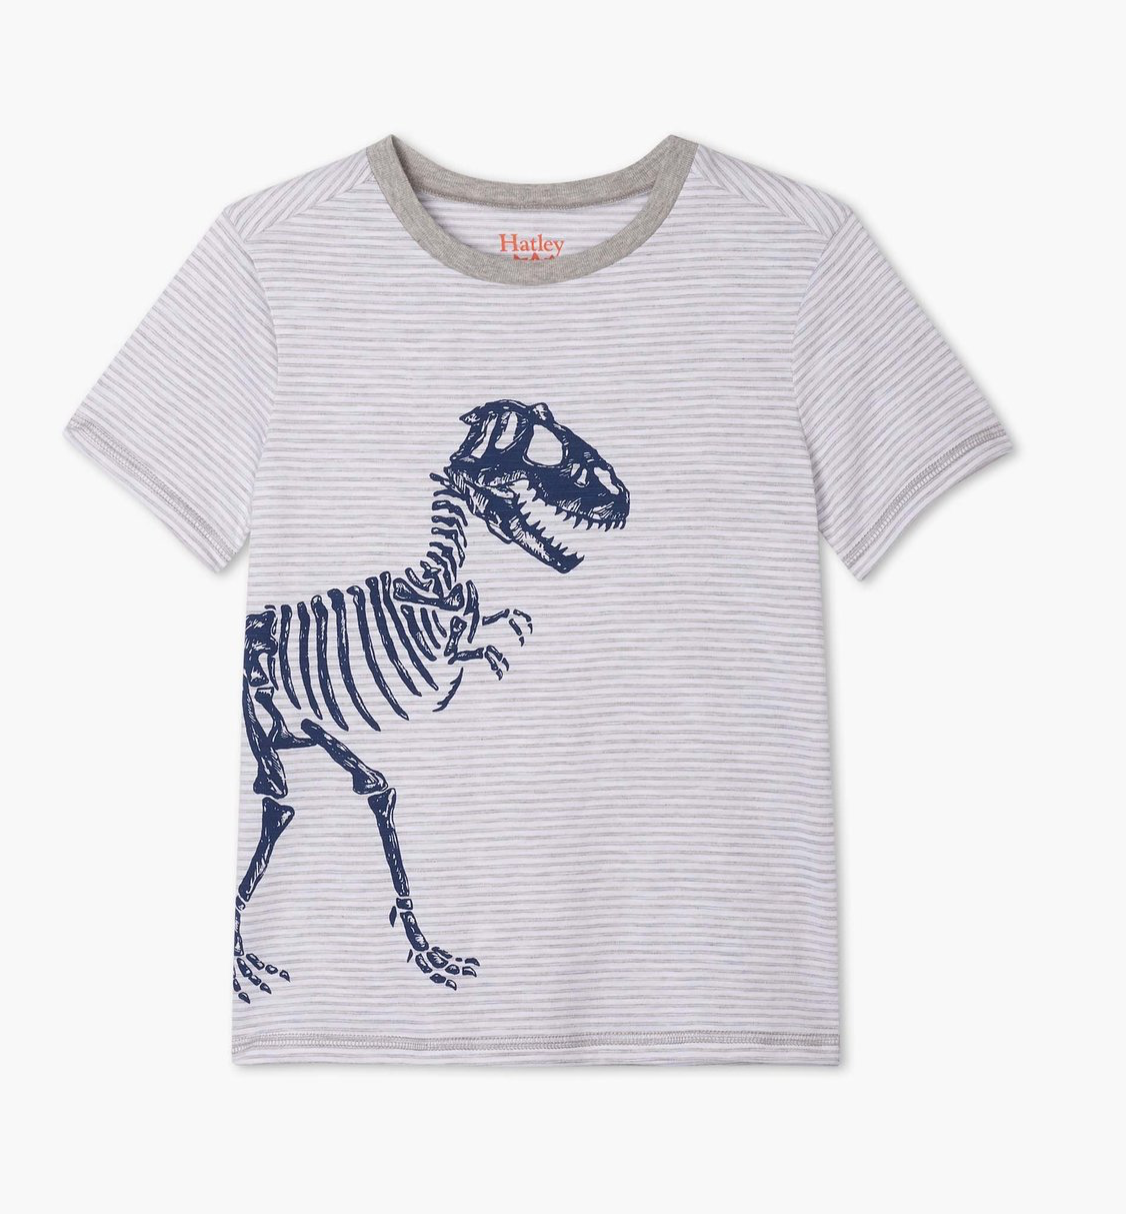 T-rex Fossil Graphic Tee - Grey